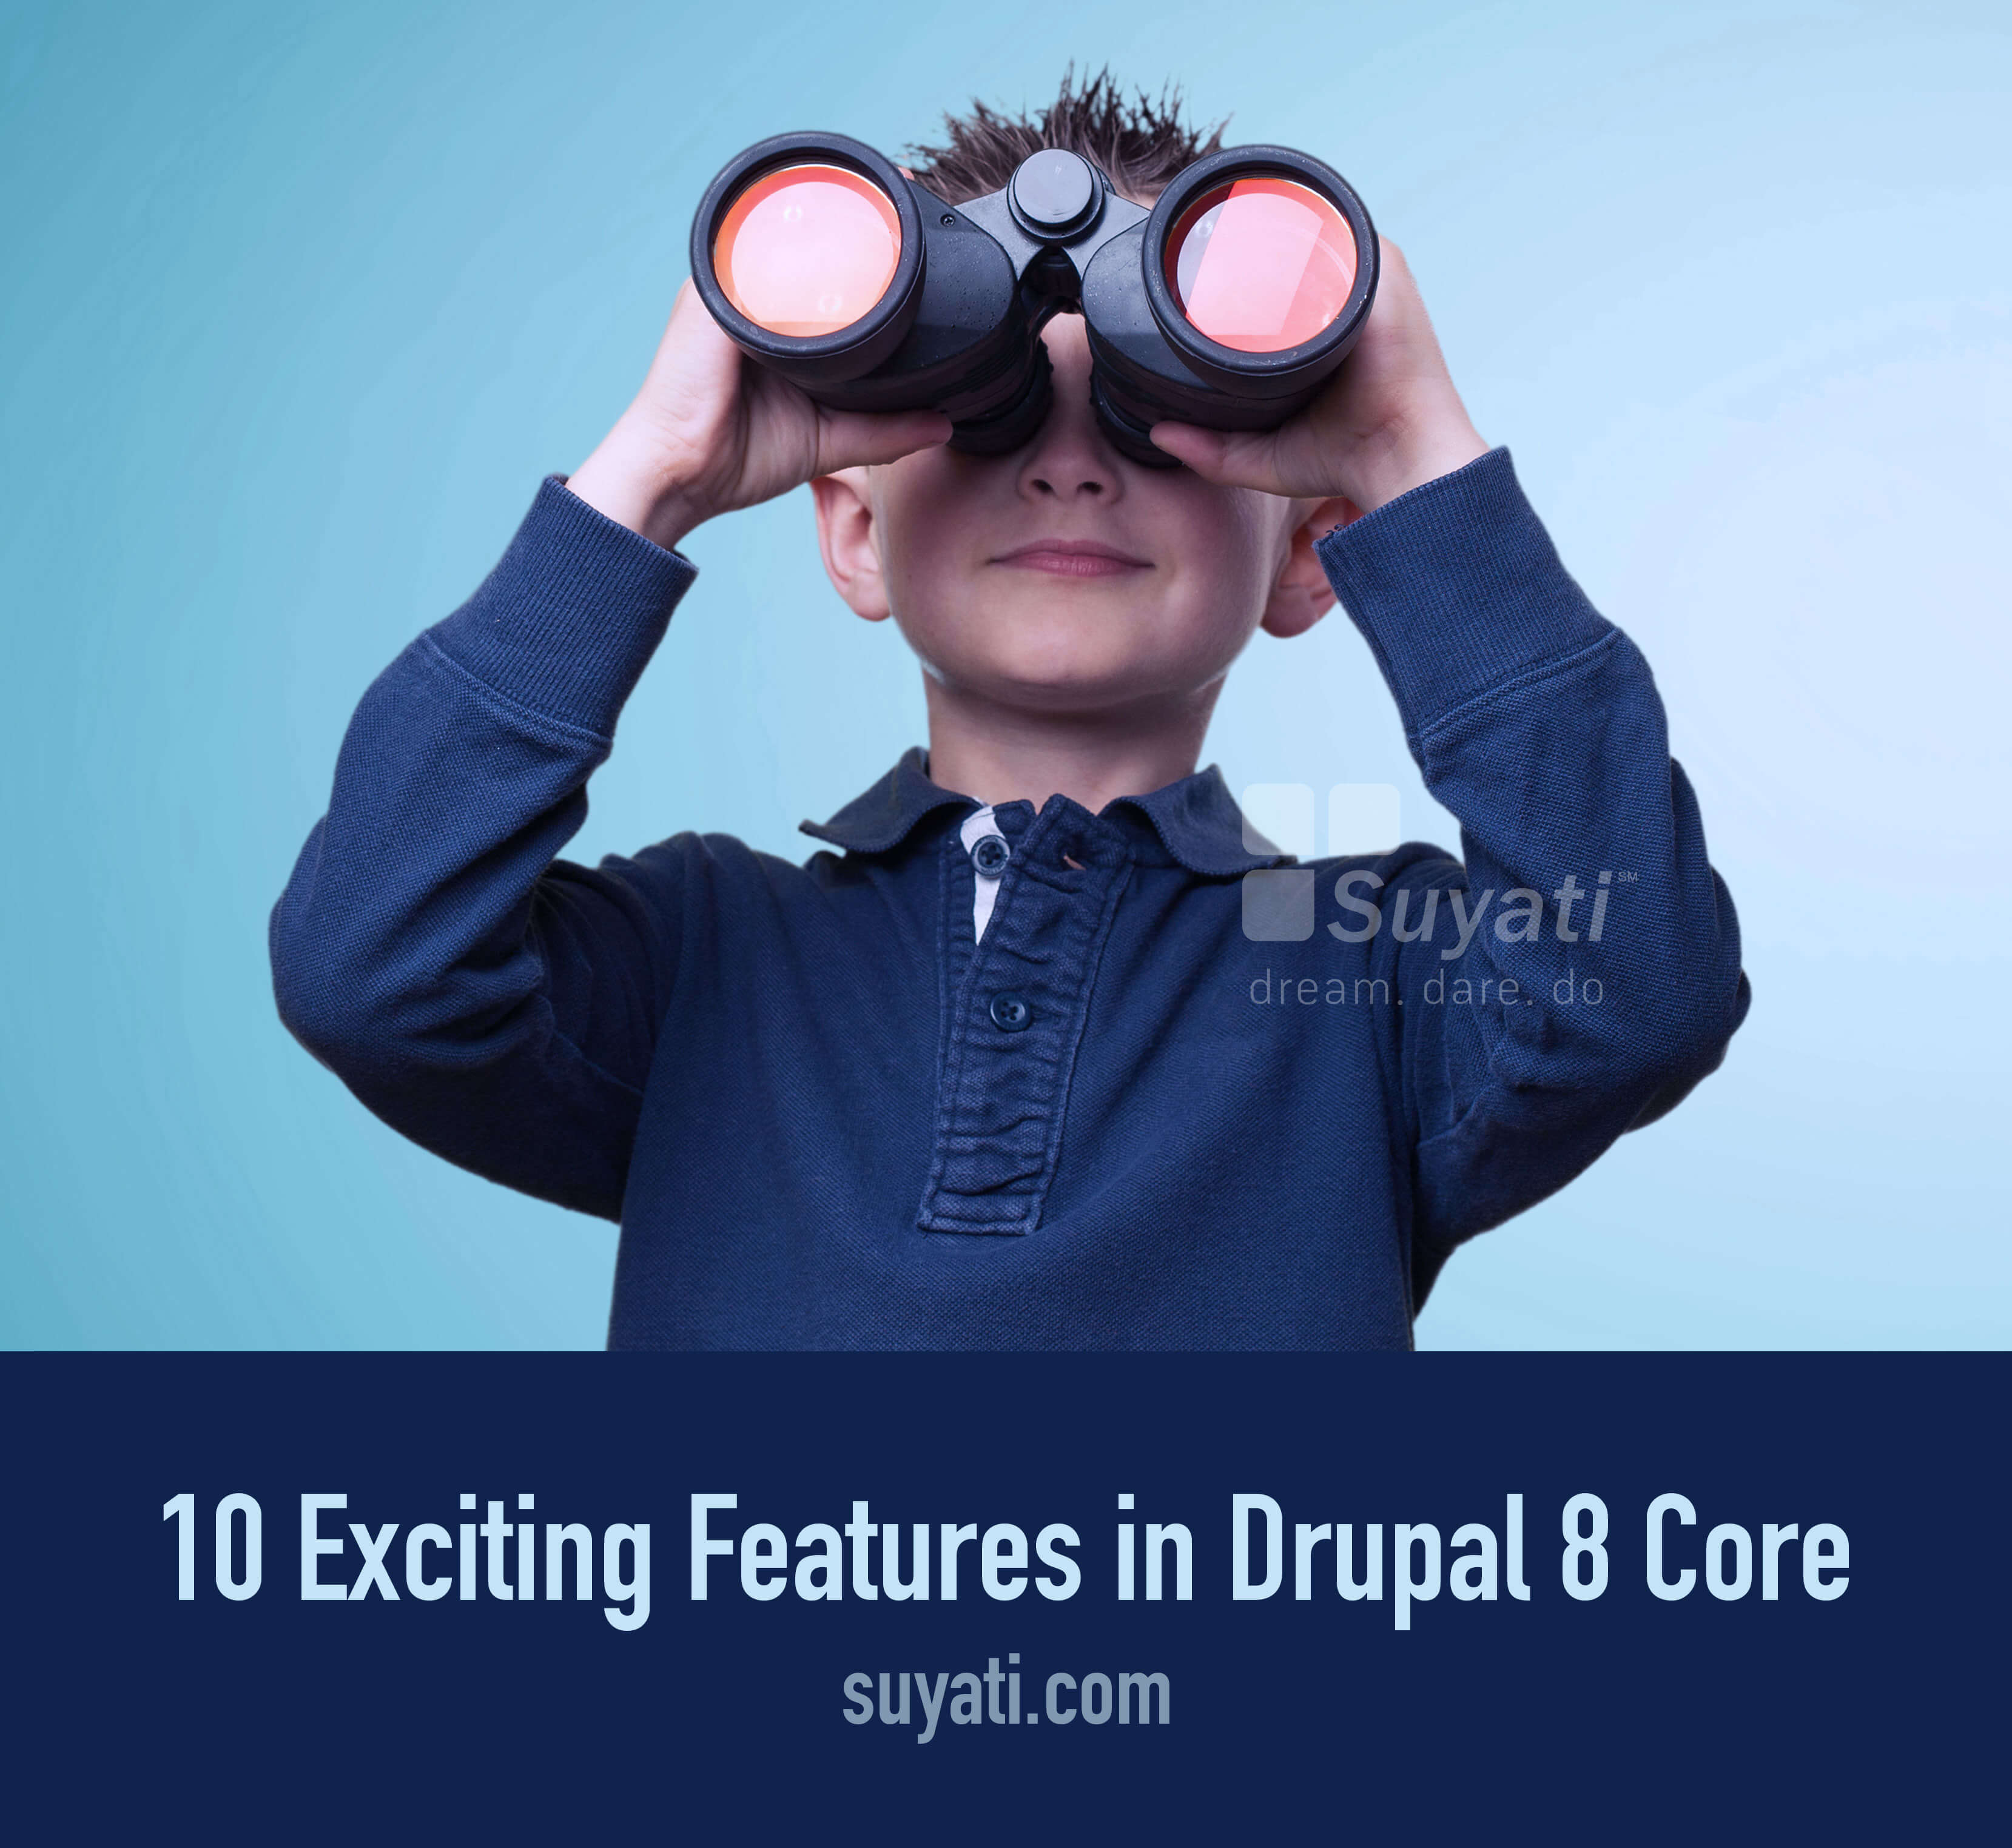 10 Exciting Features in Drupal 8 Core